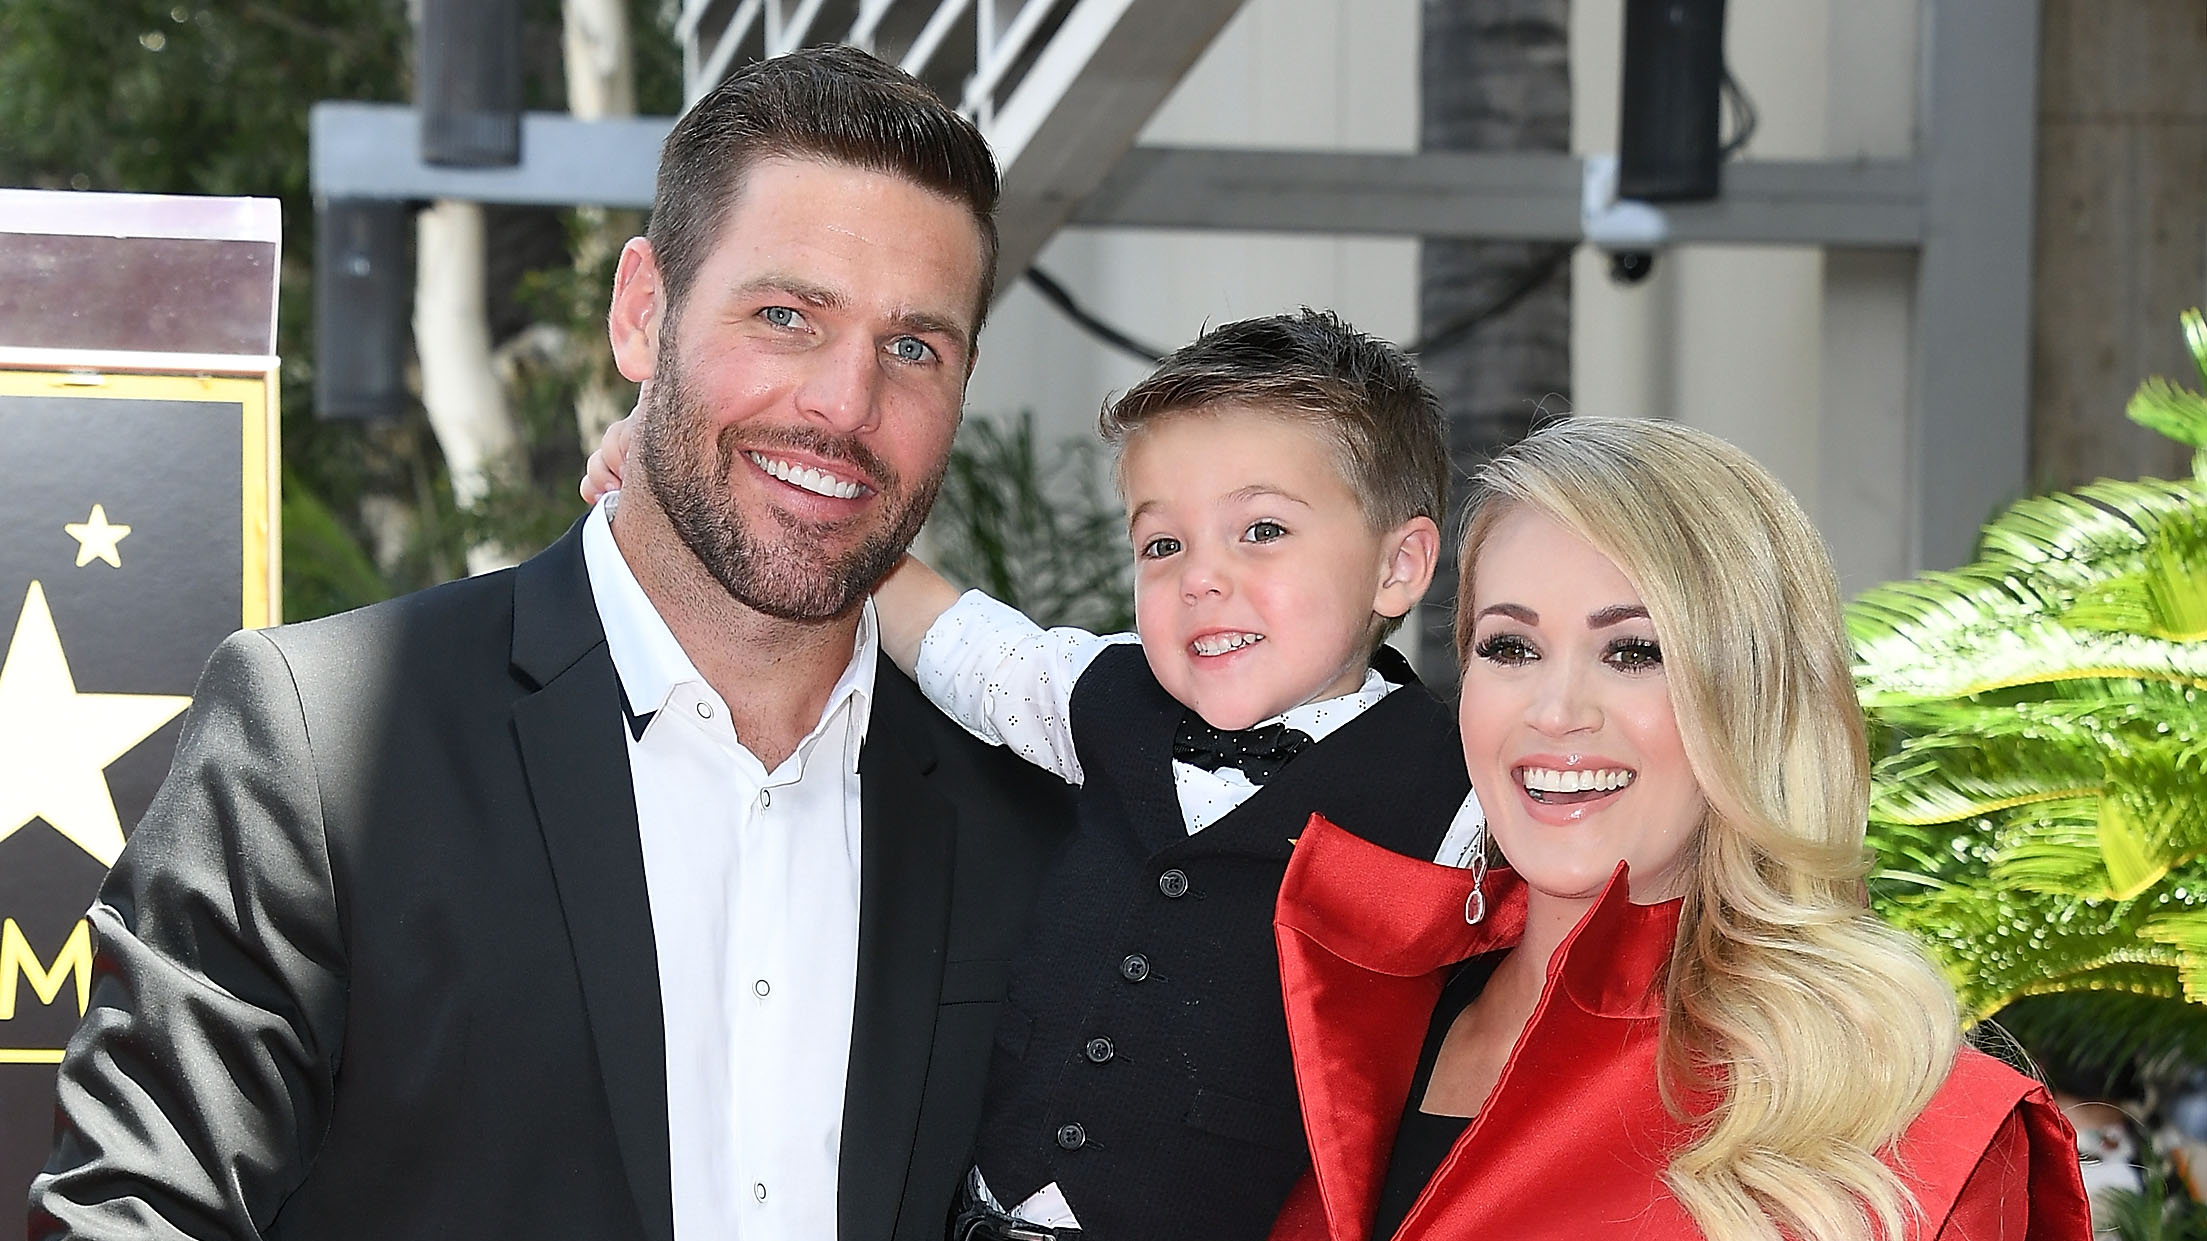 Carrie Underwood's Husband Mike Fisher and Son Isaiah Drop Puck at